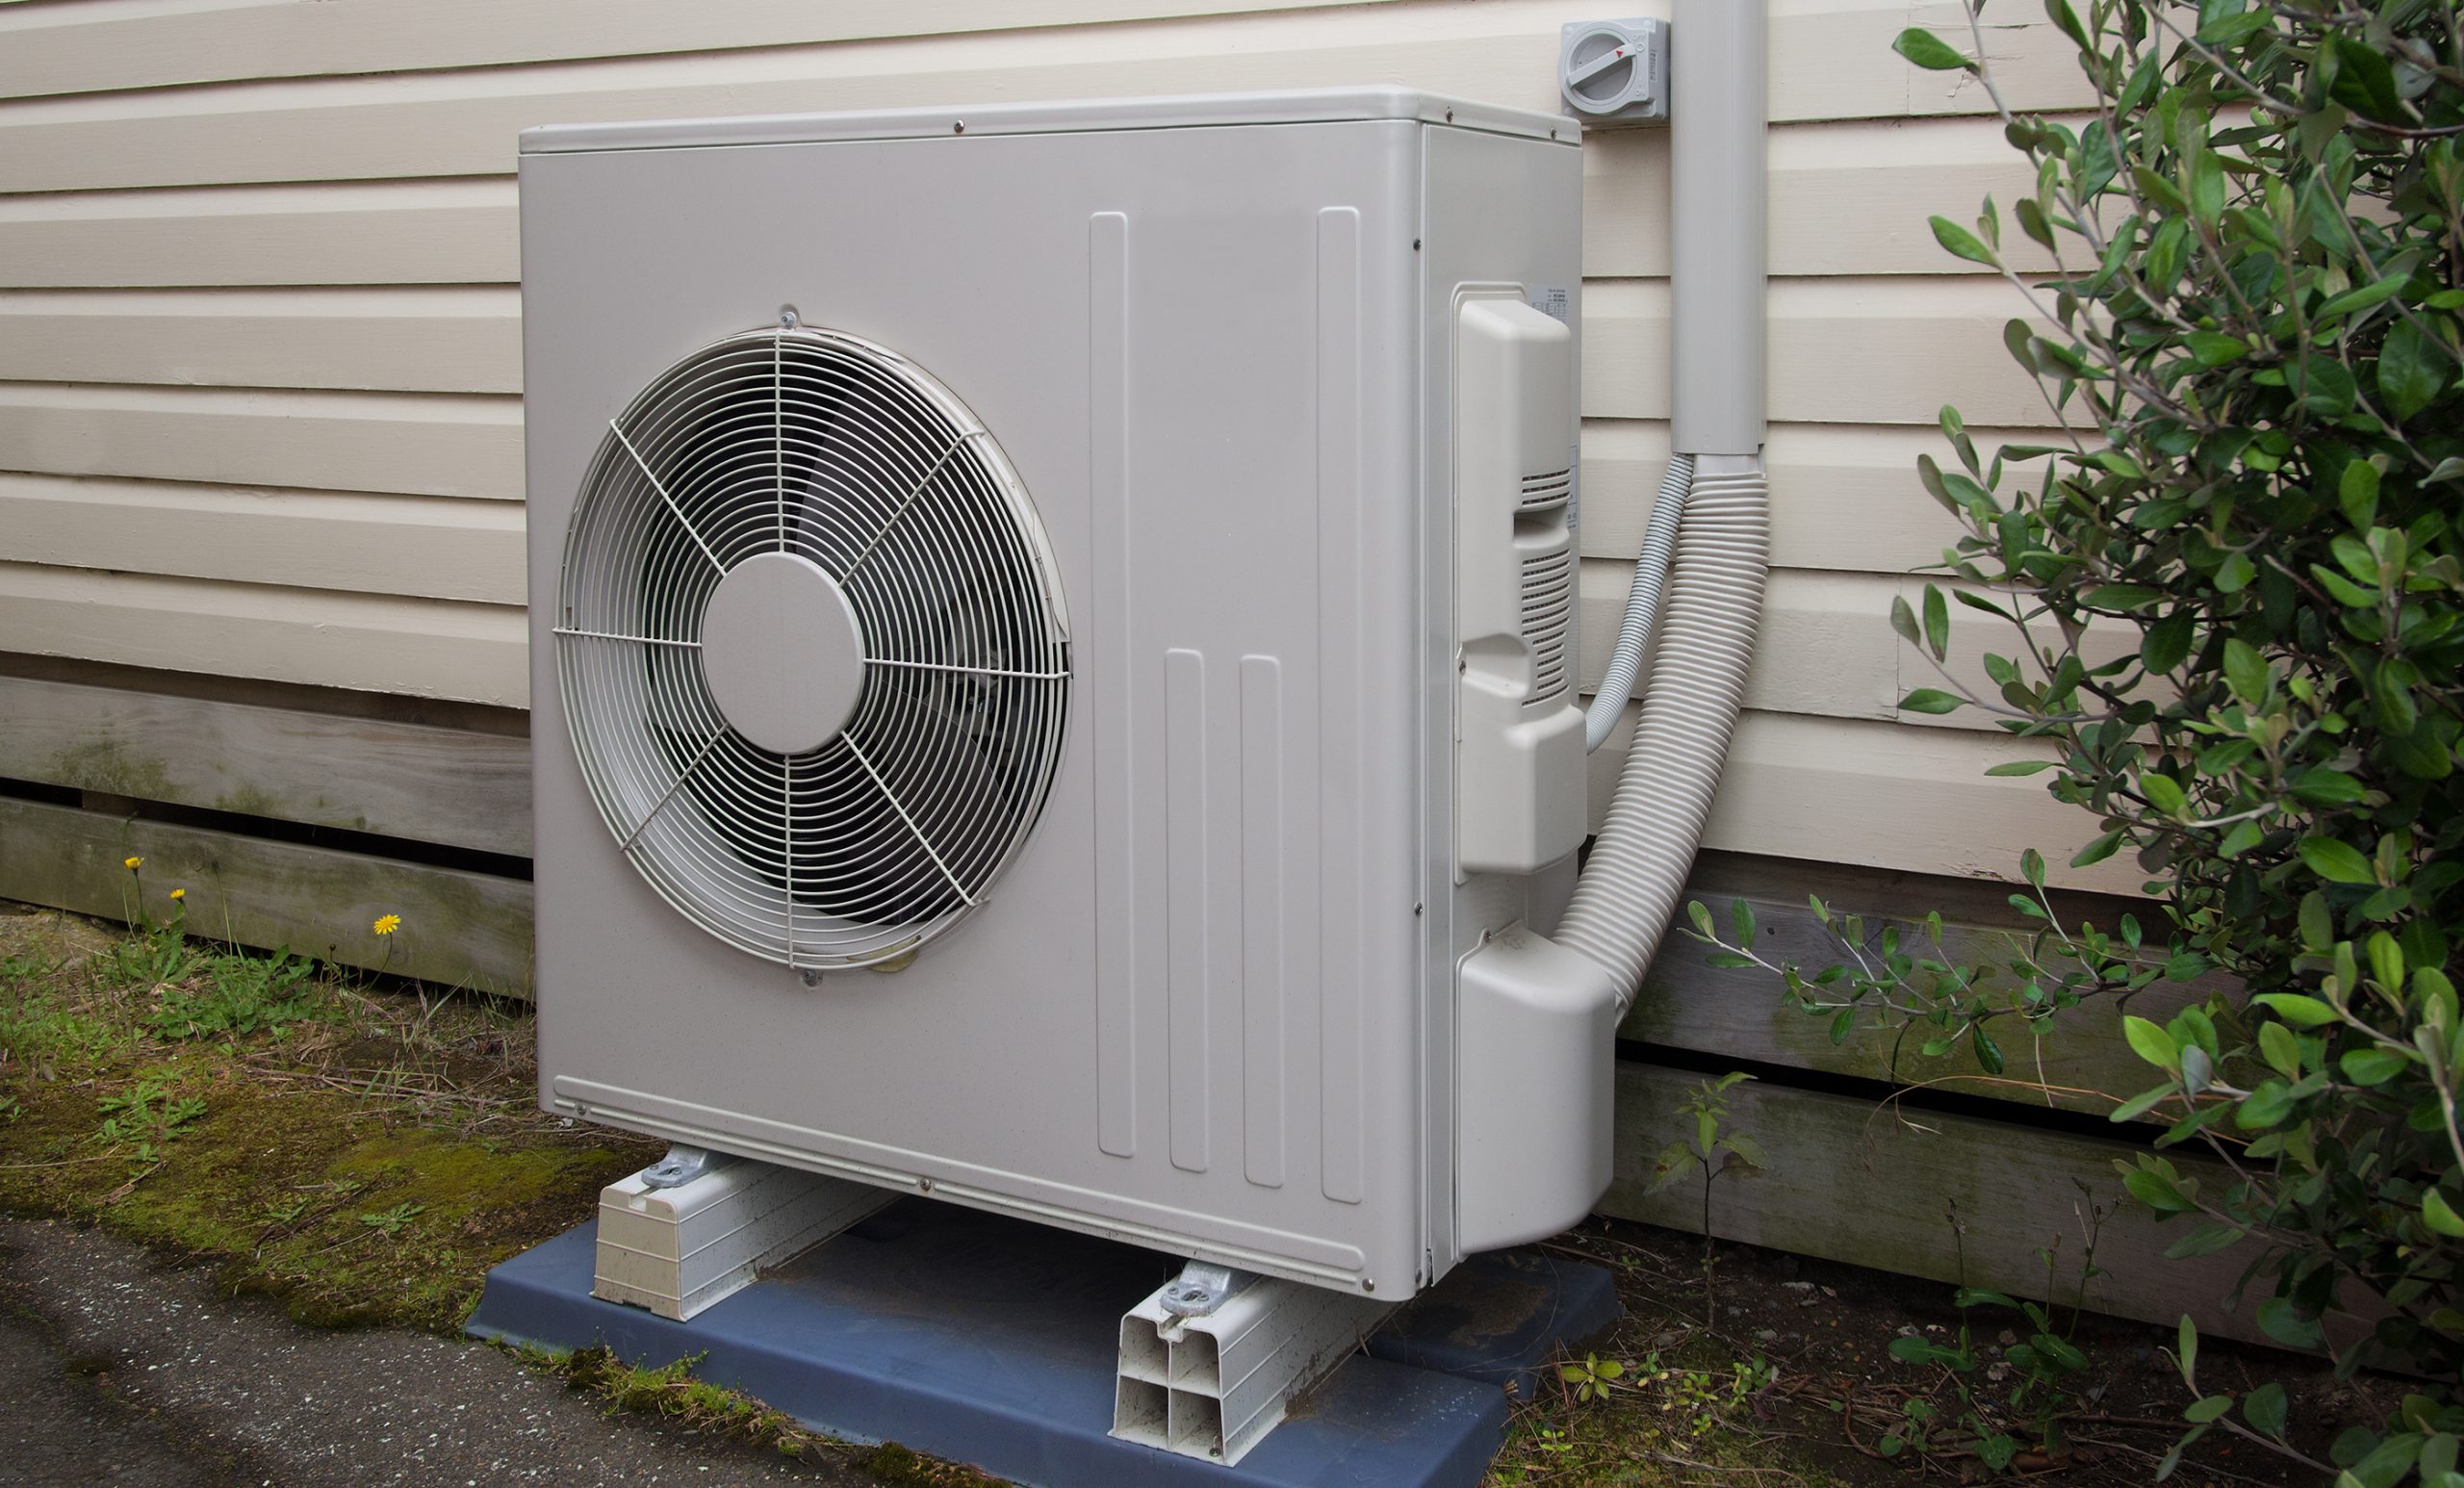 Heat Pump Repairs & Installation Services in NJ by Meyer & Depew